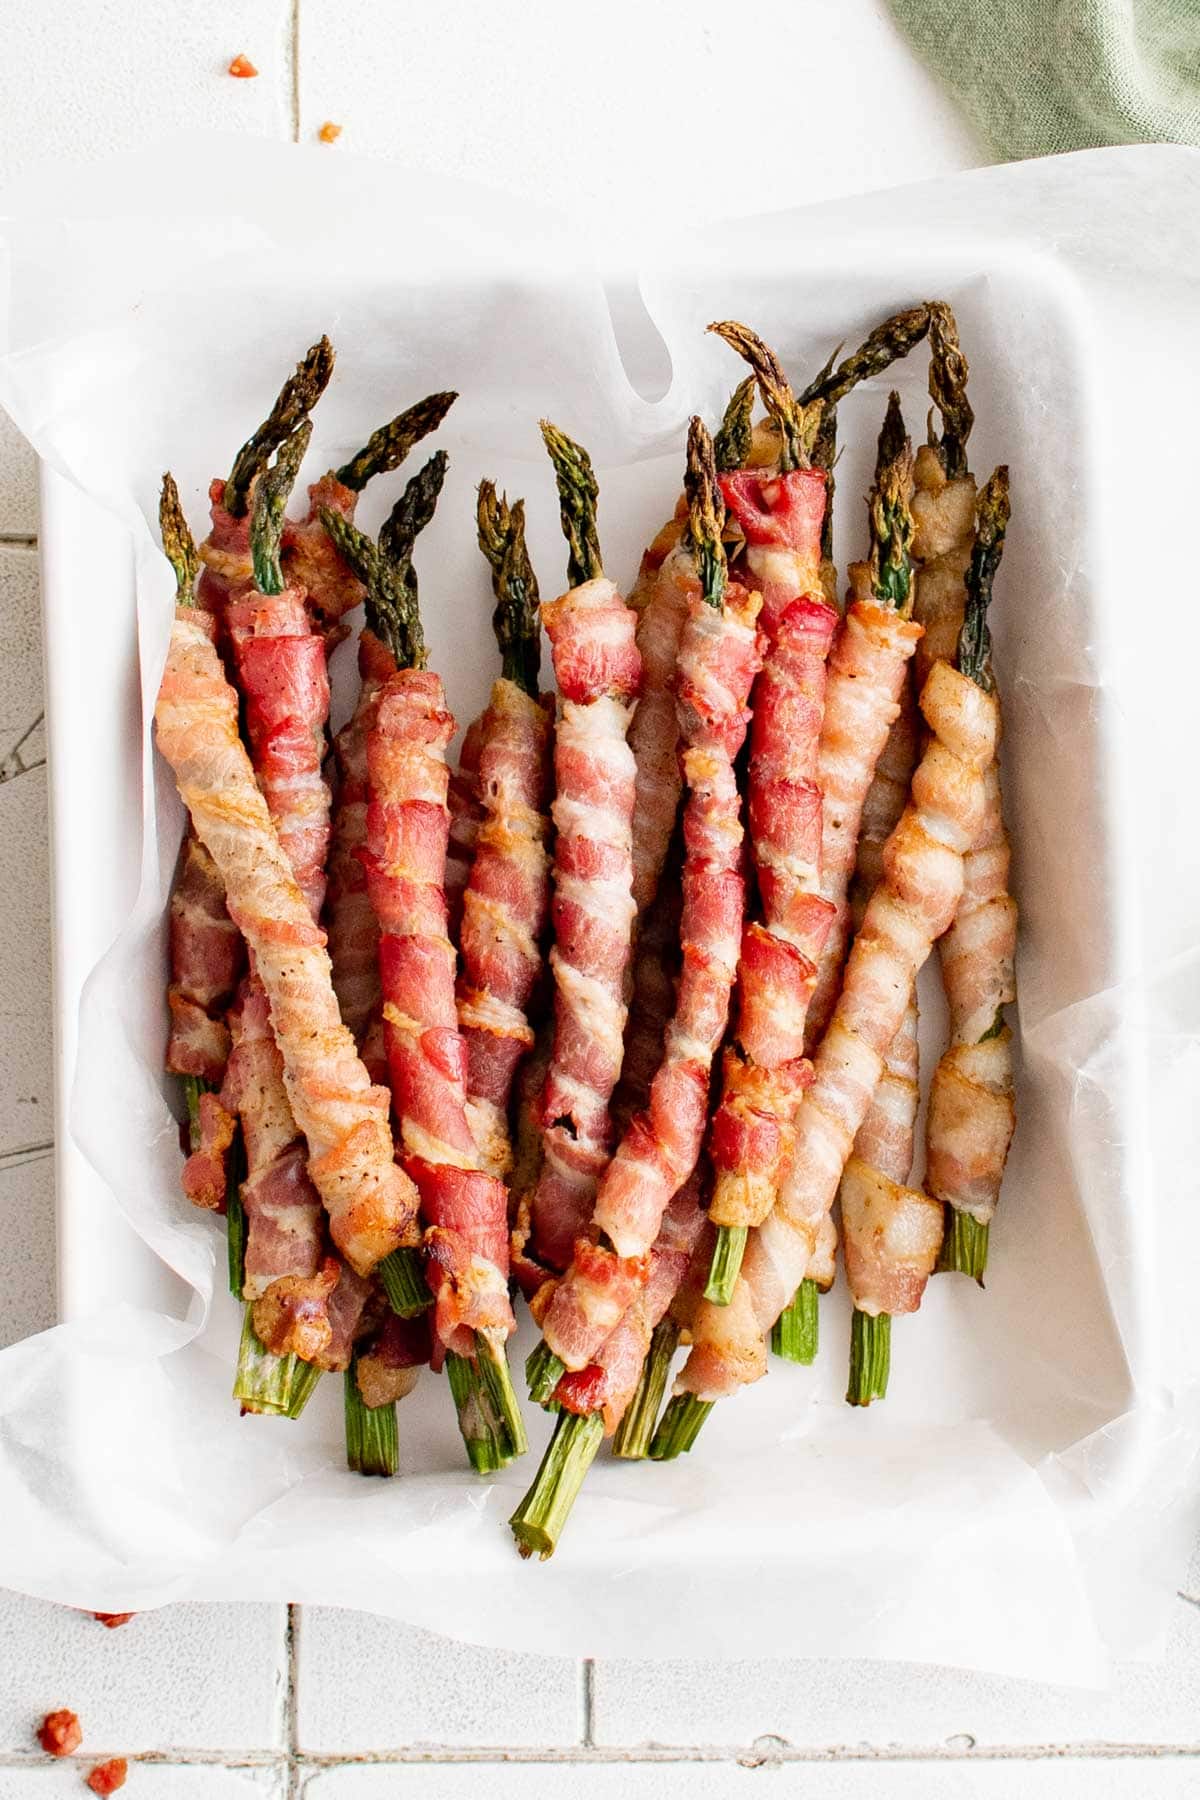 A stack of bacon wrapped asparagus in a white dish.